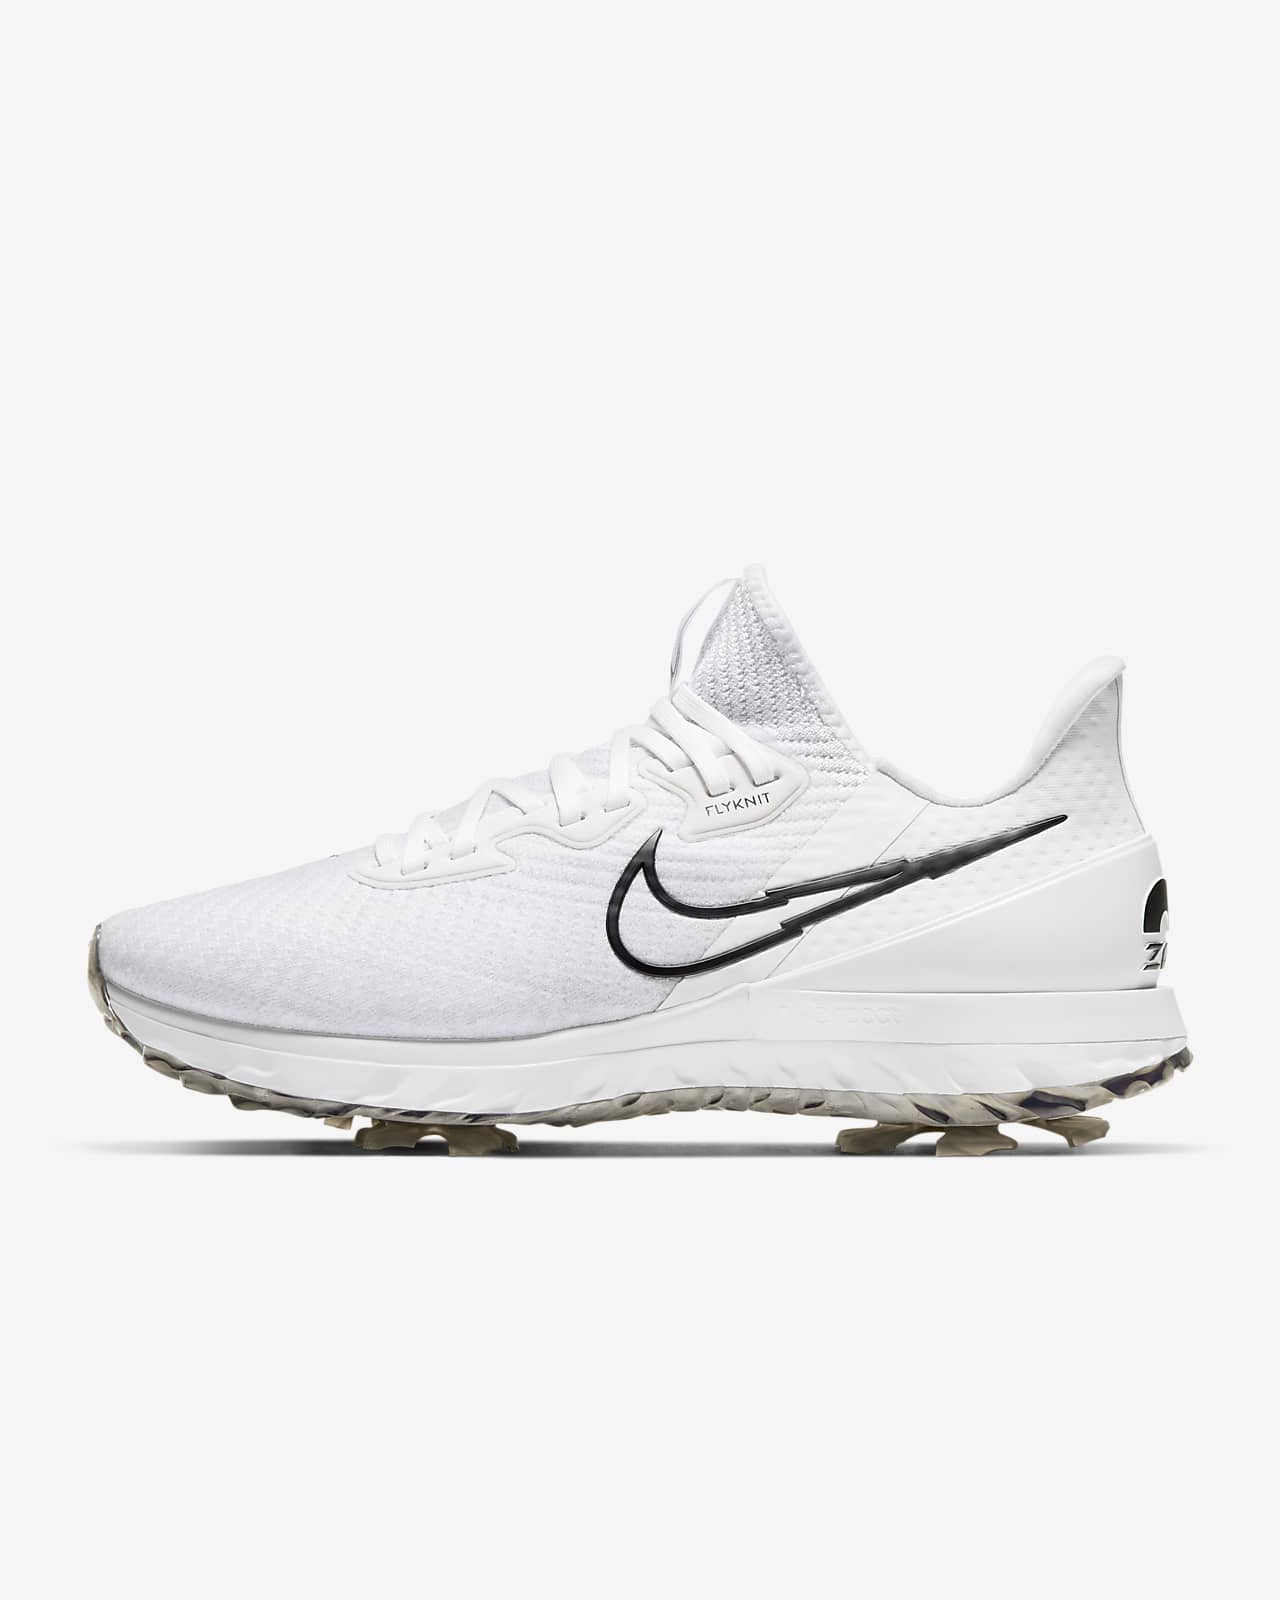 new nike golf shoes 2020 infinity tour